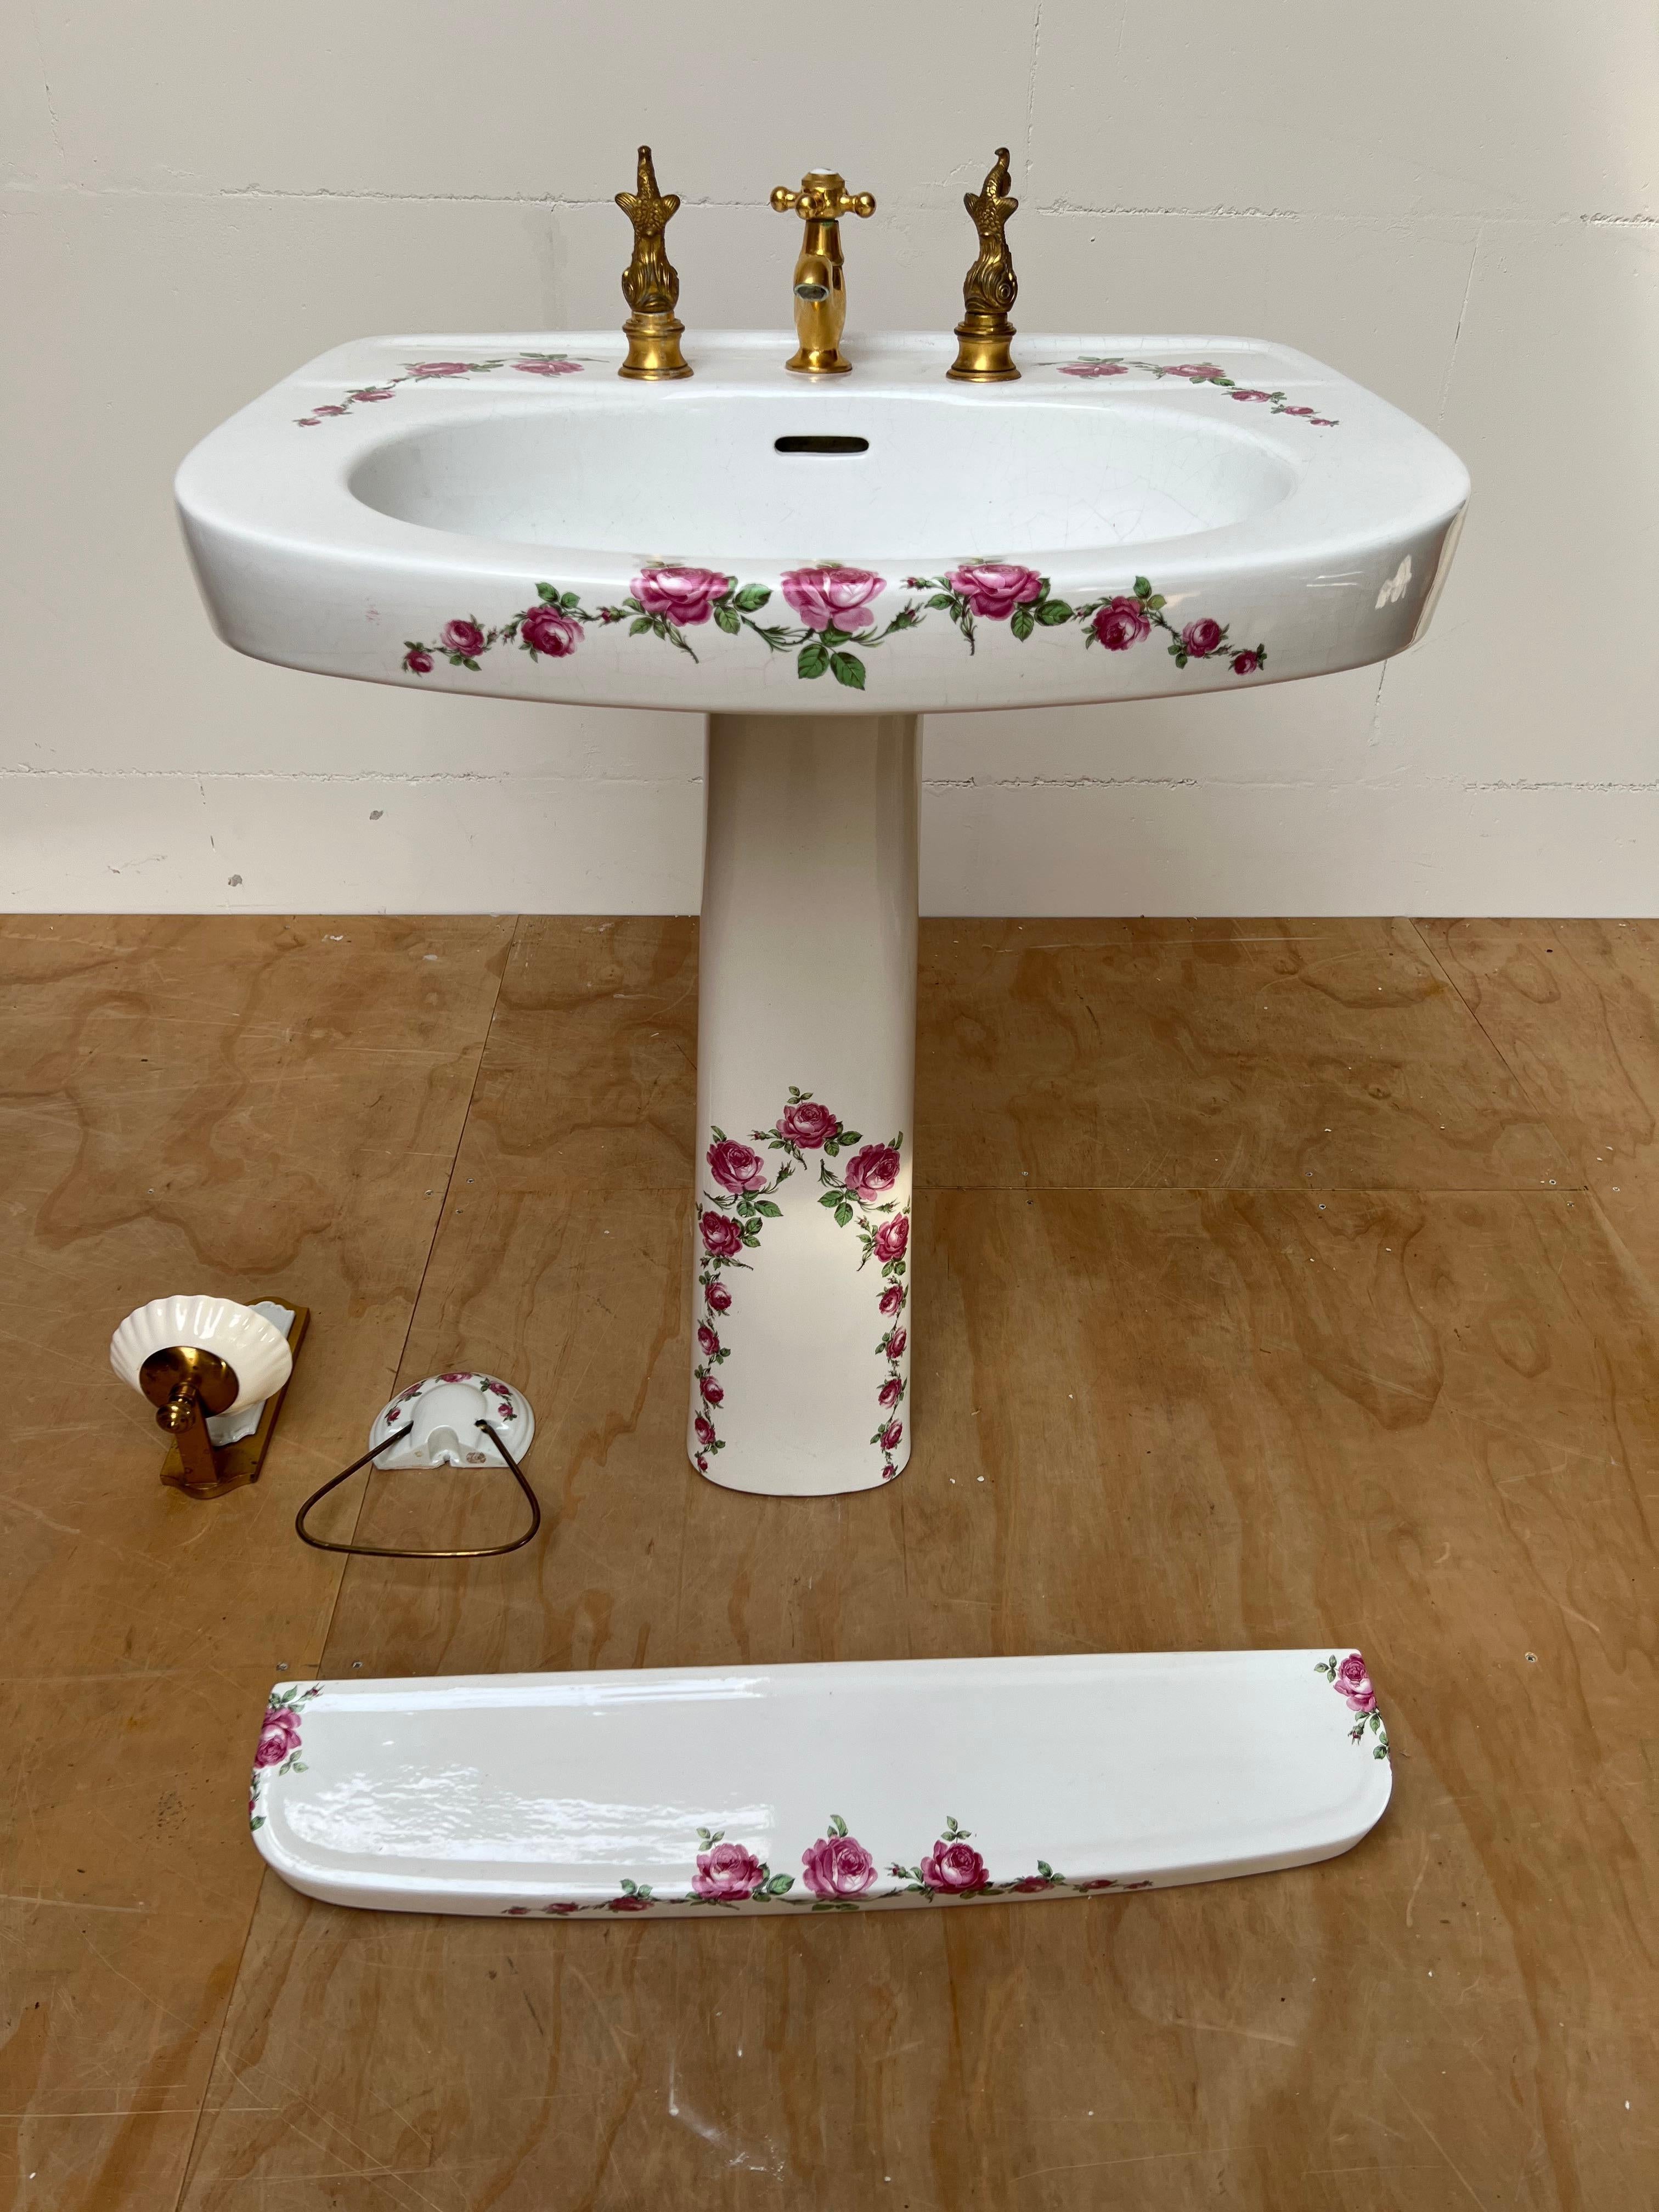 Highly decorative porcelain bathroom set with stunning roses pattern, by one of Europe's finest.

Over the years we have sold very few porcelain Limoges pieces and that is simply because these high value items don't find there way to the open market